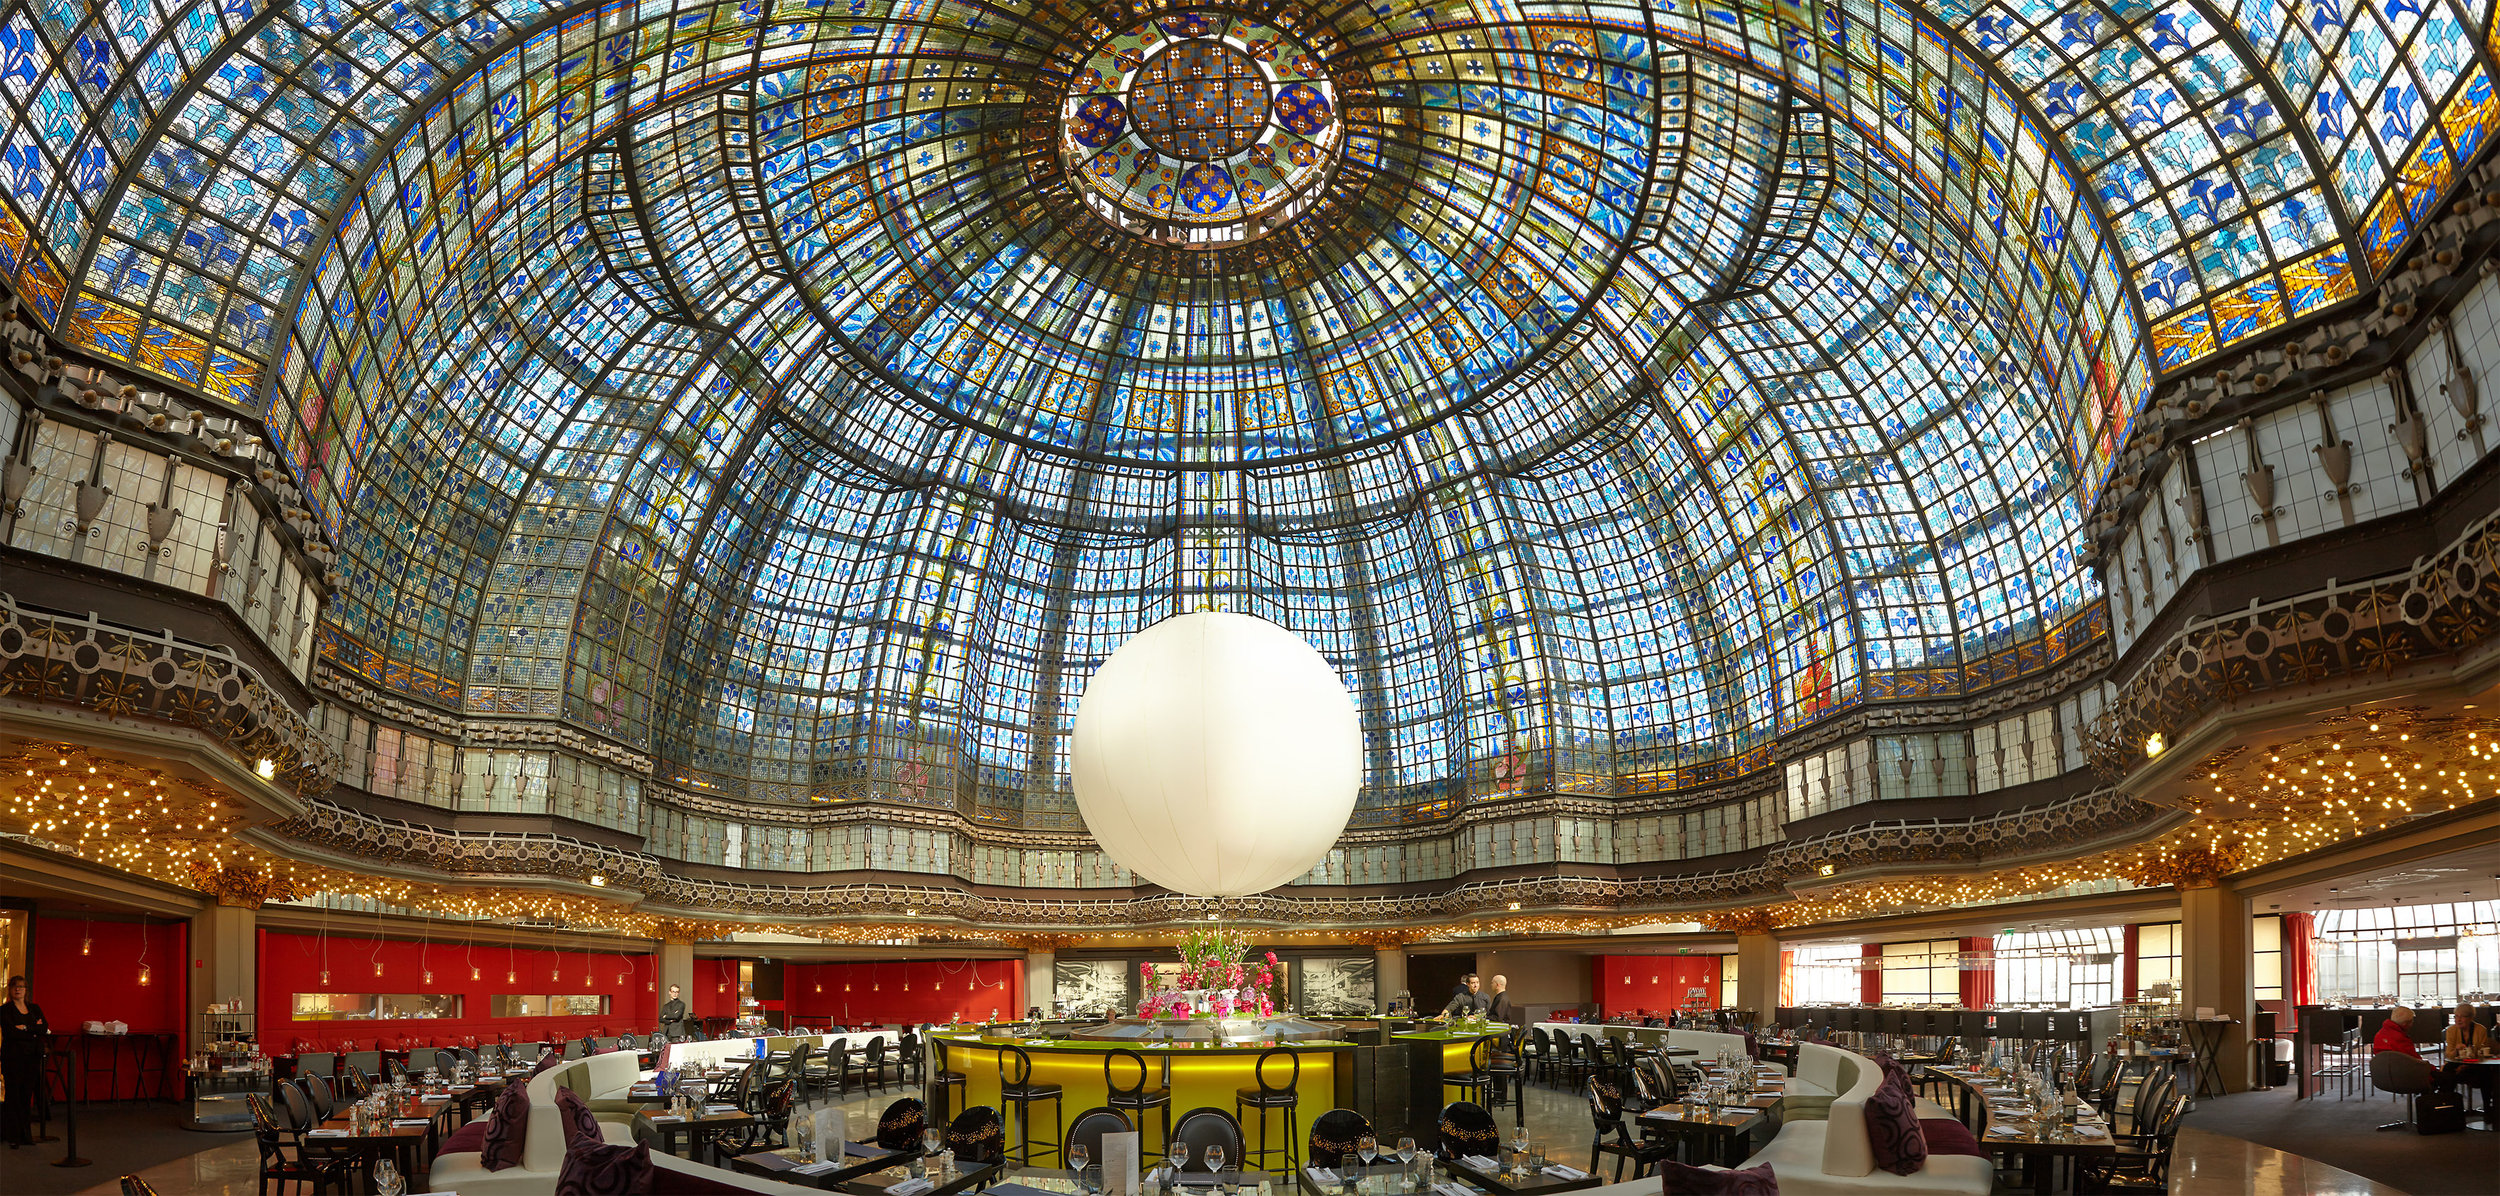  coupole Galeries lafayette 